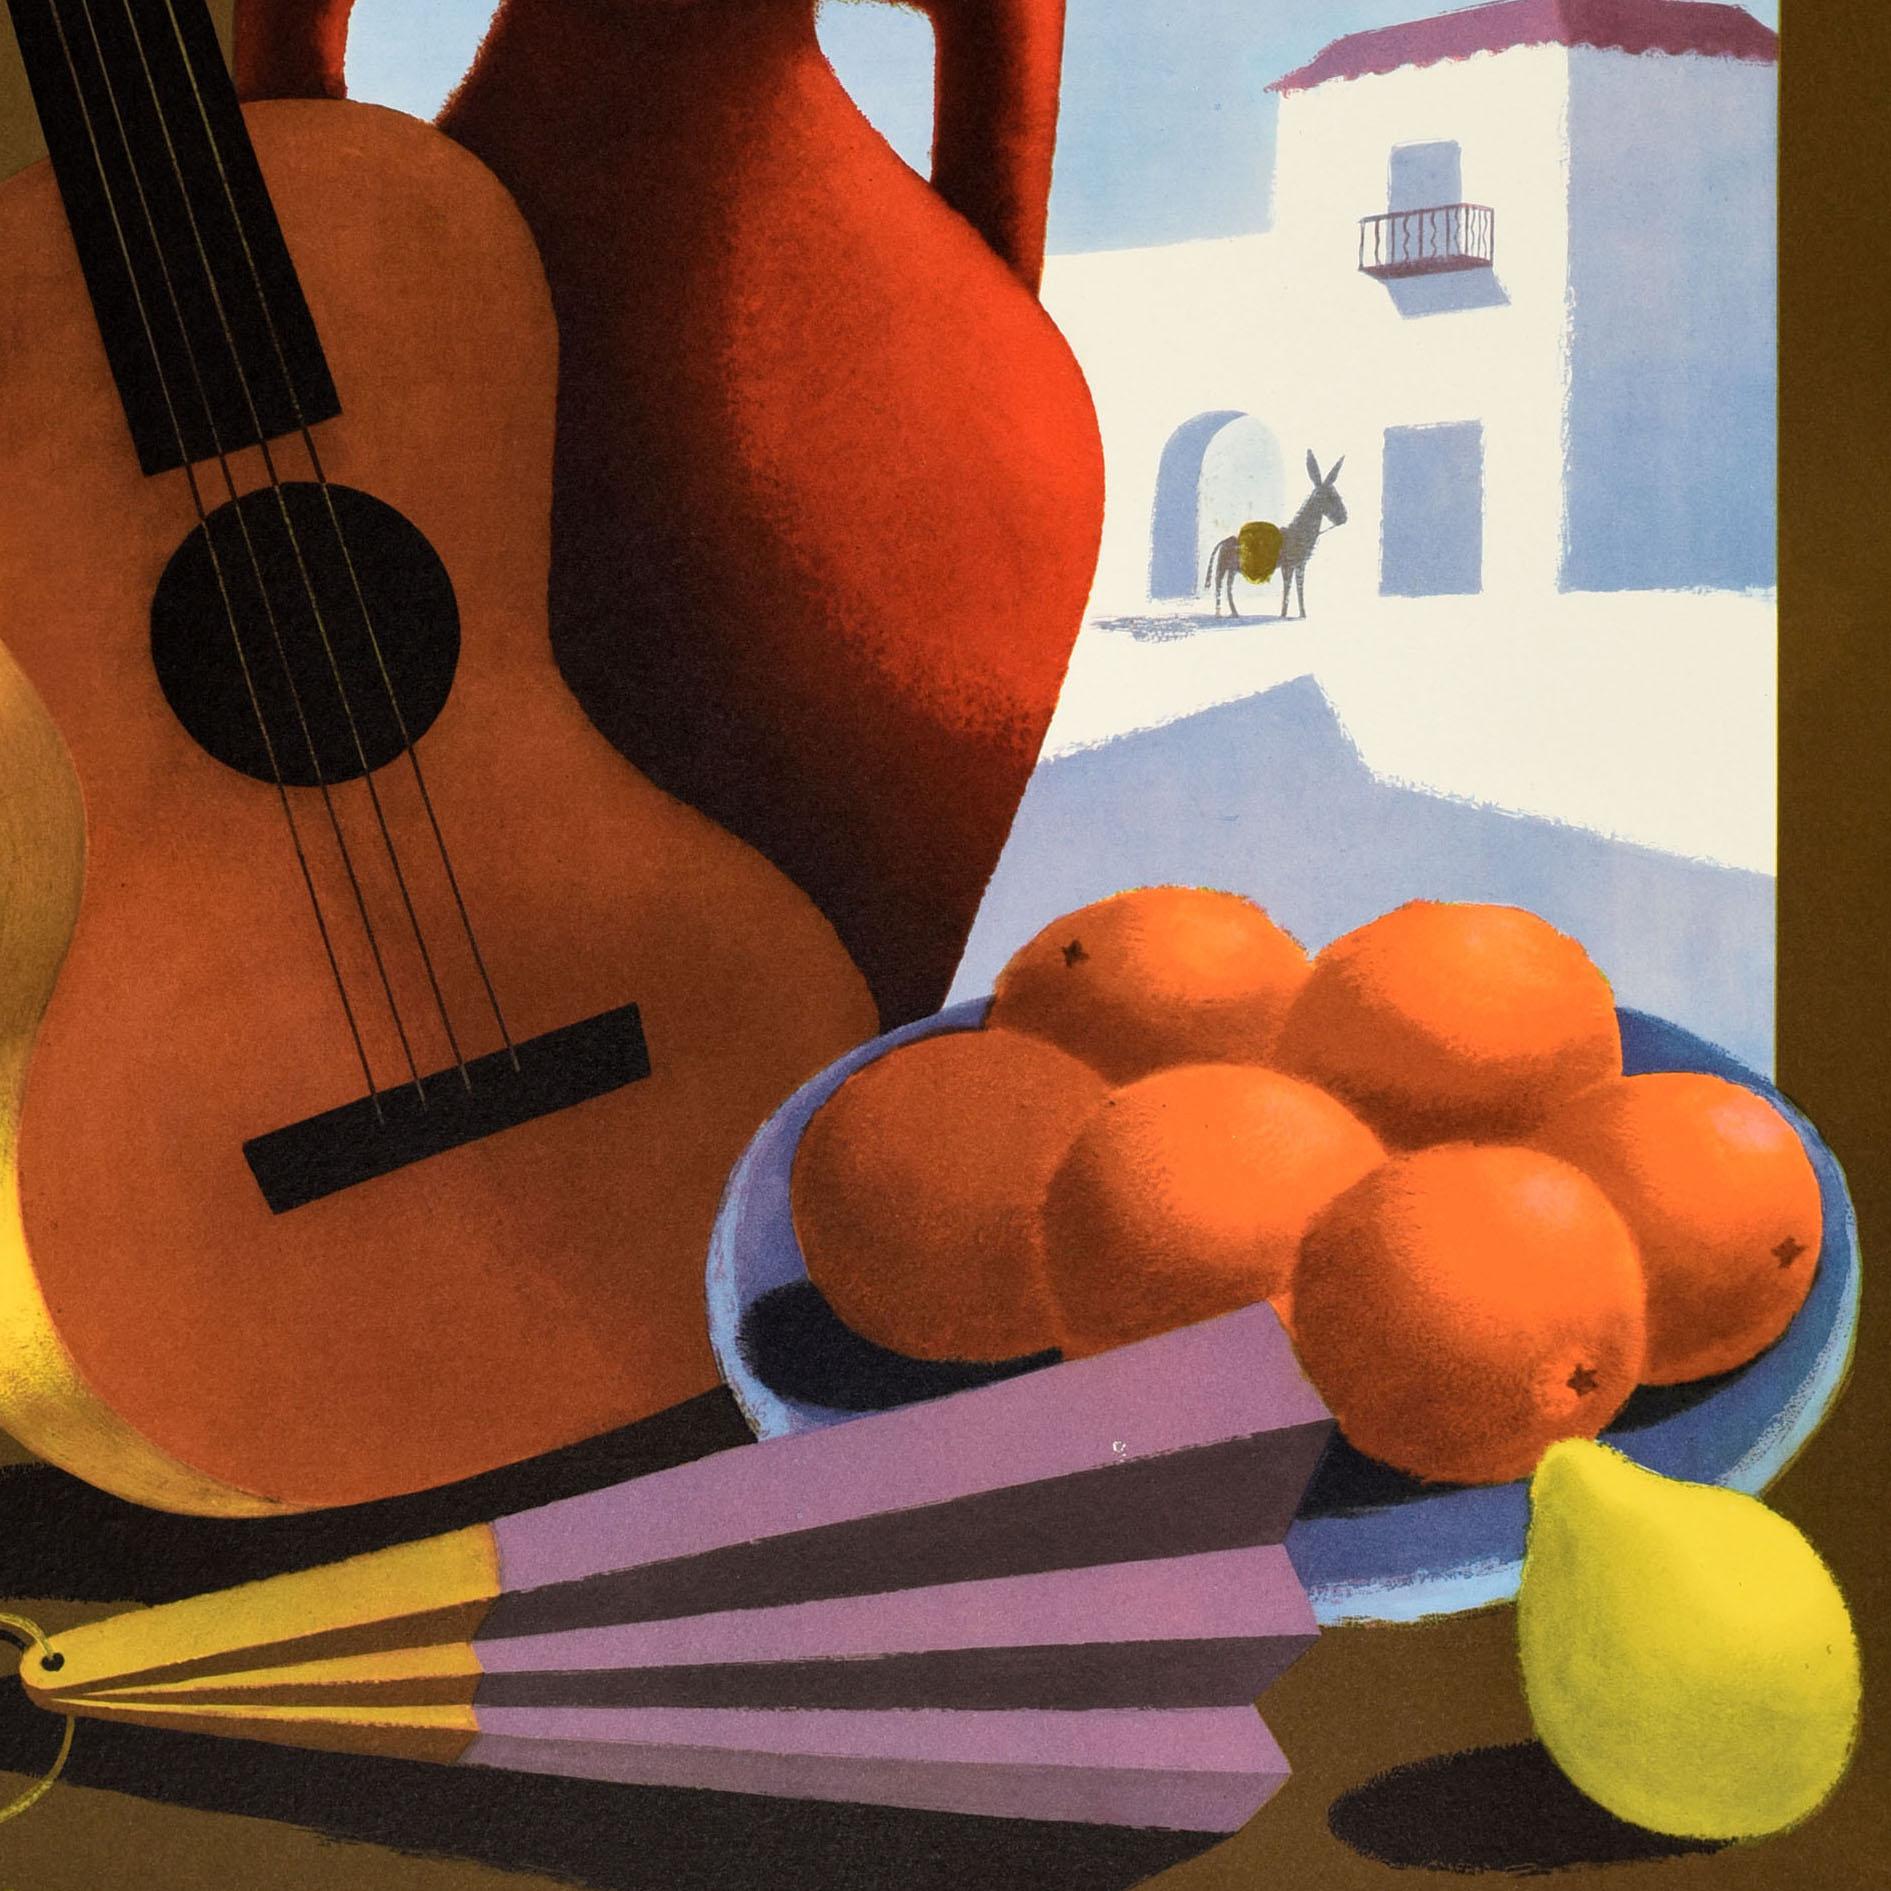 Original vintage travel poster for Spain / Spanien issued by the Spanish State Tourist Office featuring a colourful still life design by Guy Georget (1911-1992) depicting a fan and pot, oranges on a plate, a lemon and a guitar against the wall with